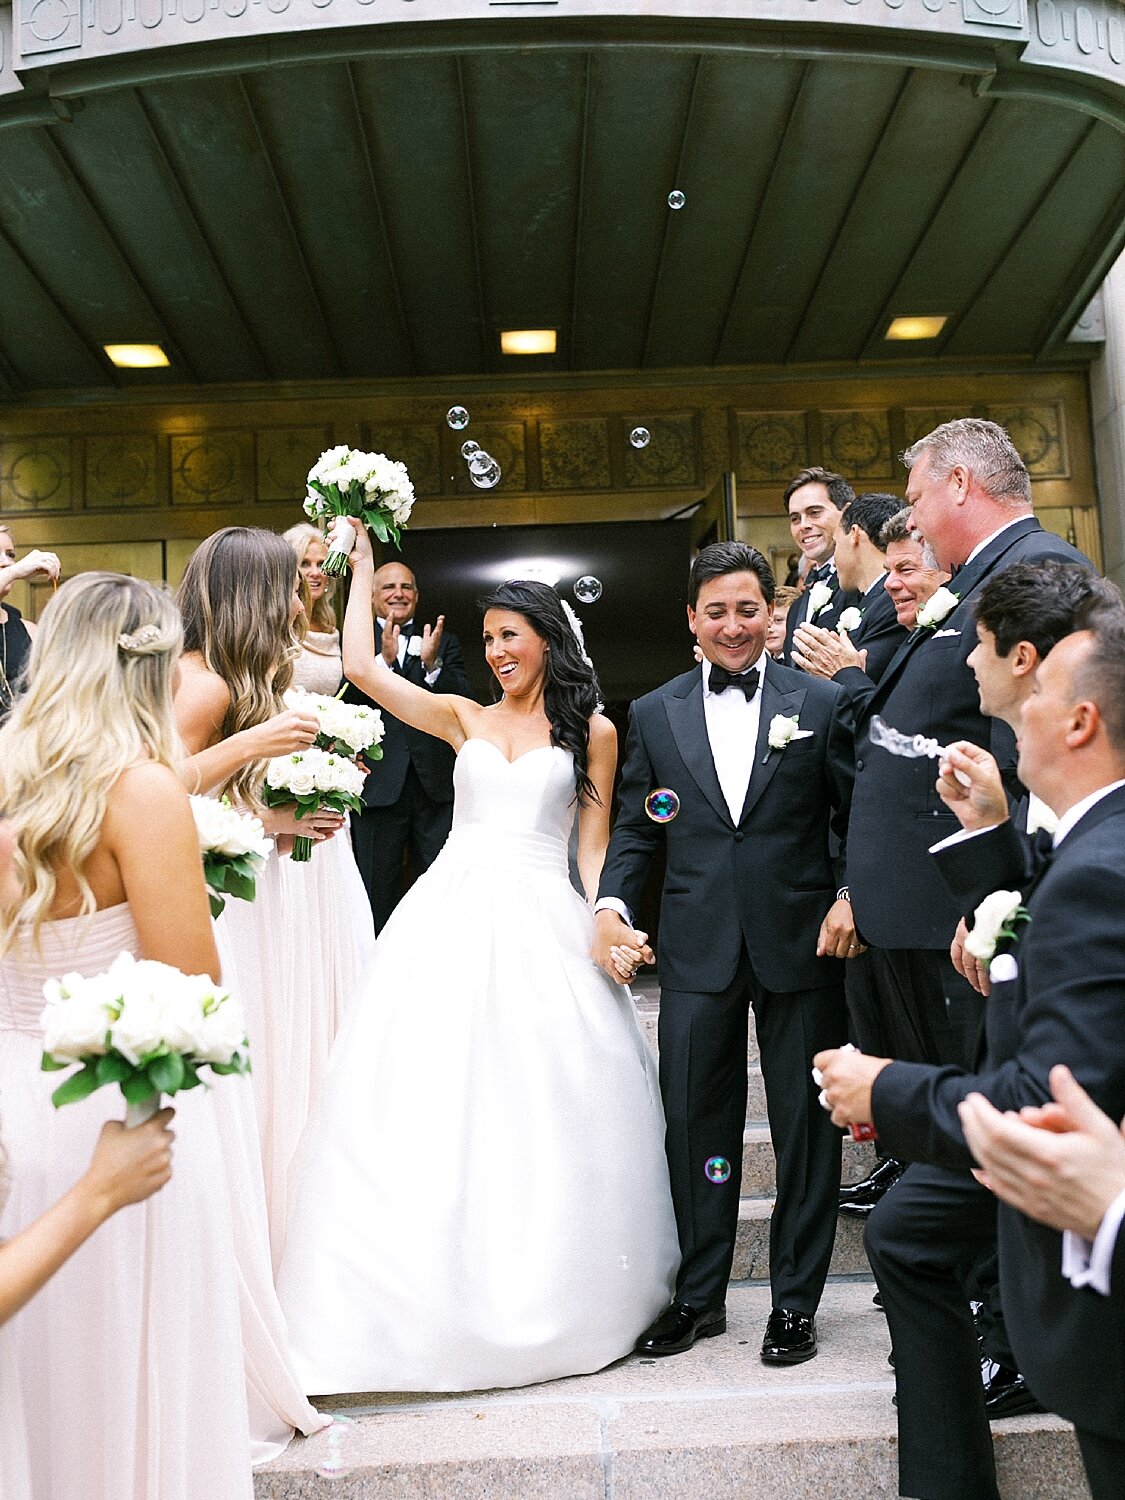 send off from traditional church wedding ceremony in Long Island photographed by Asher Gardner Photography